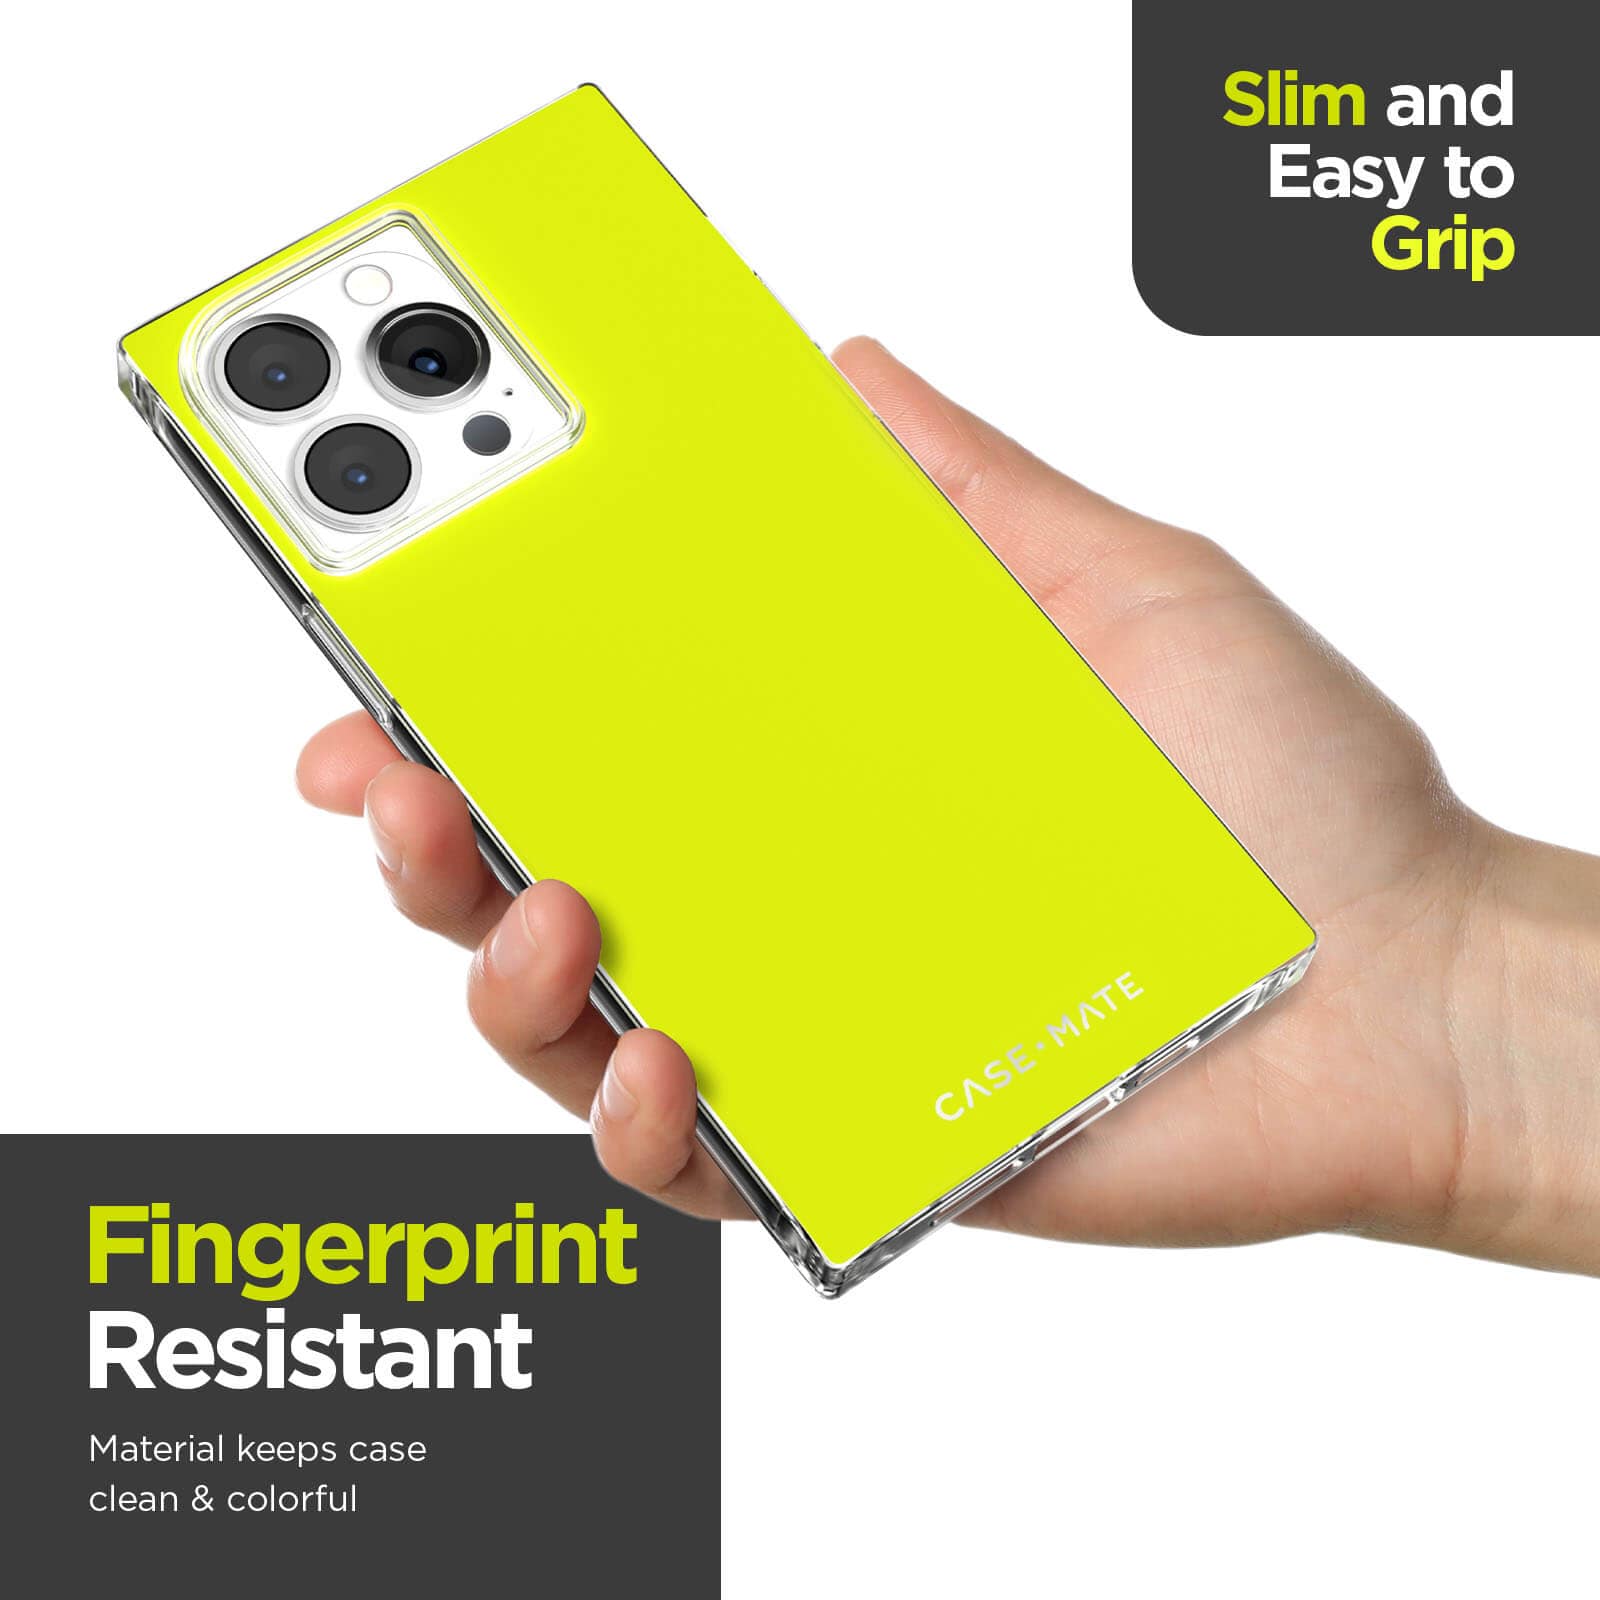 Slim and easy to grip. Fingerprint resistant material keeps case clean & colorful. color::Neon Yellow